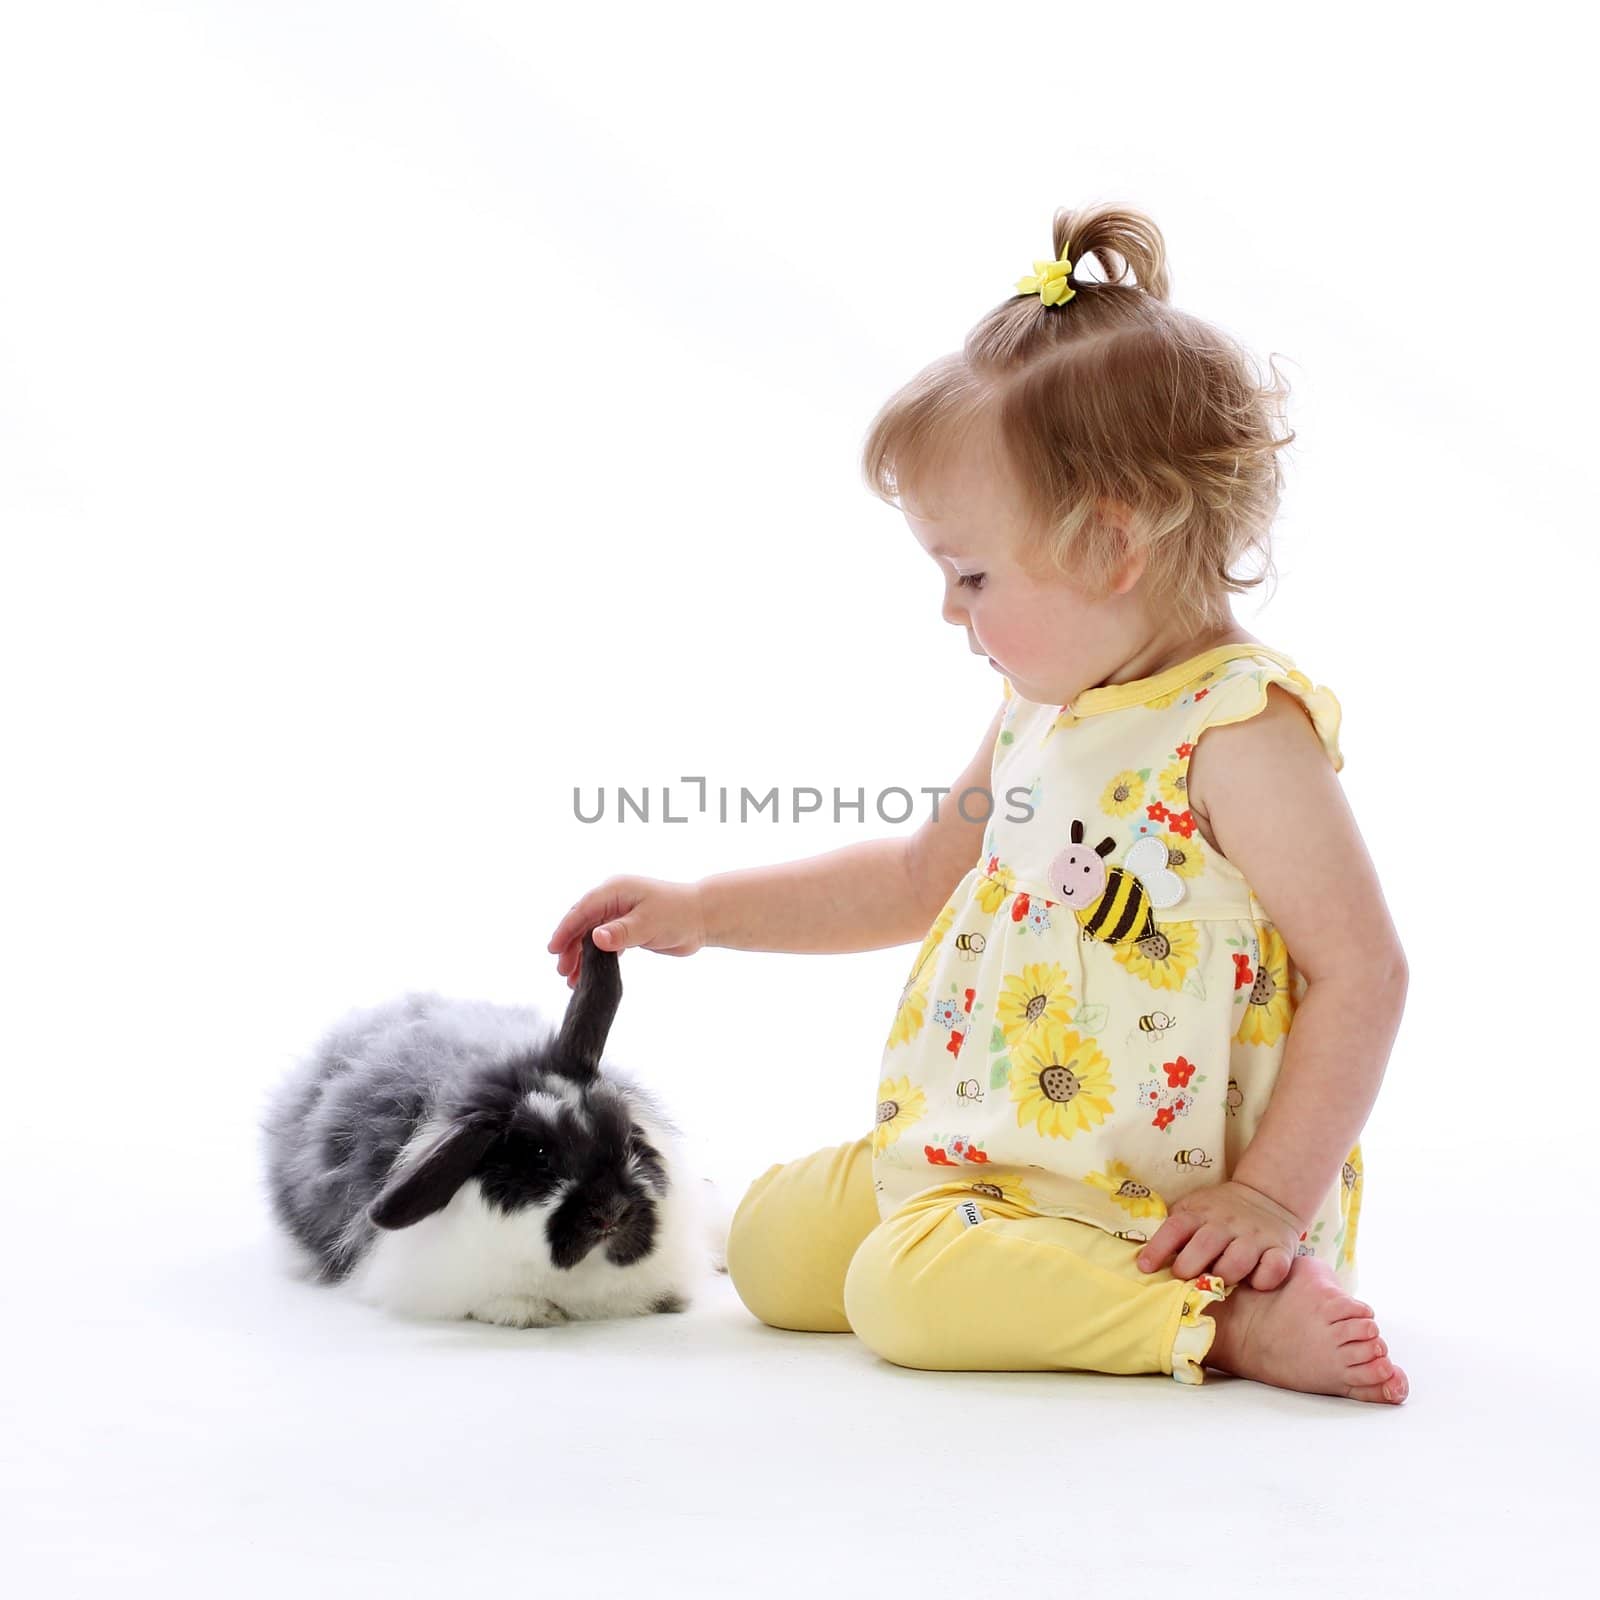 A young girl plays with a bunny rabbits ear showing curiosity and wonder on a white background